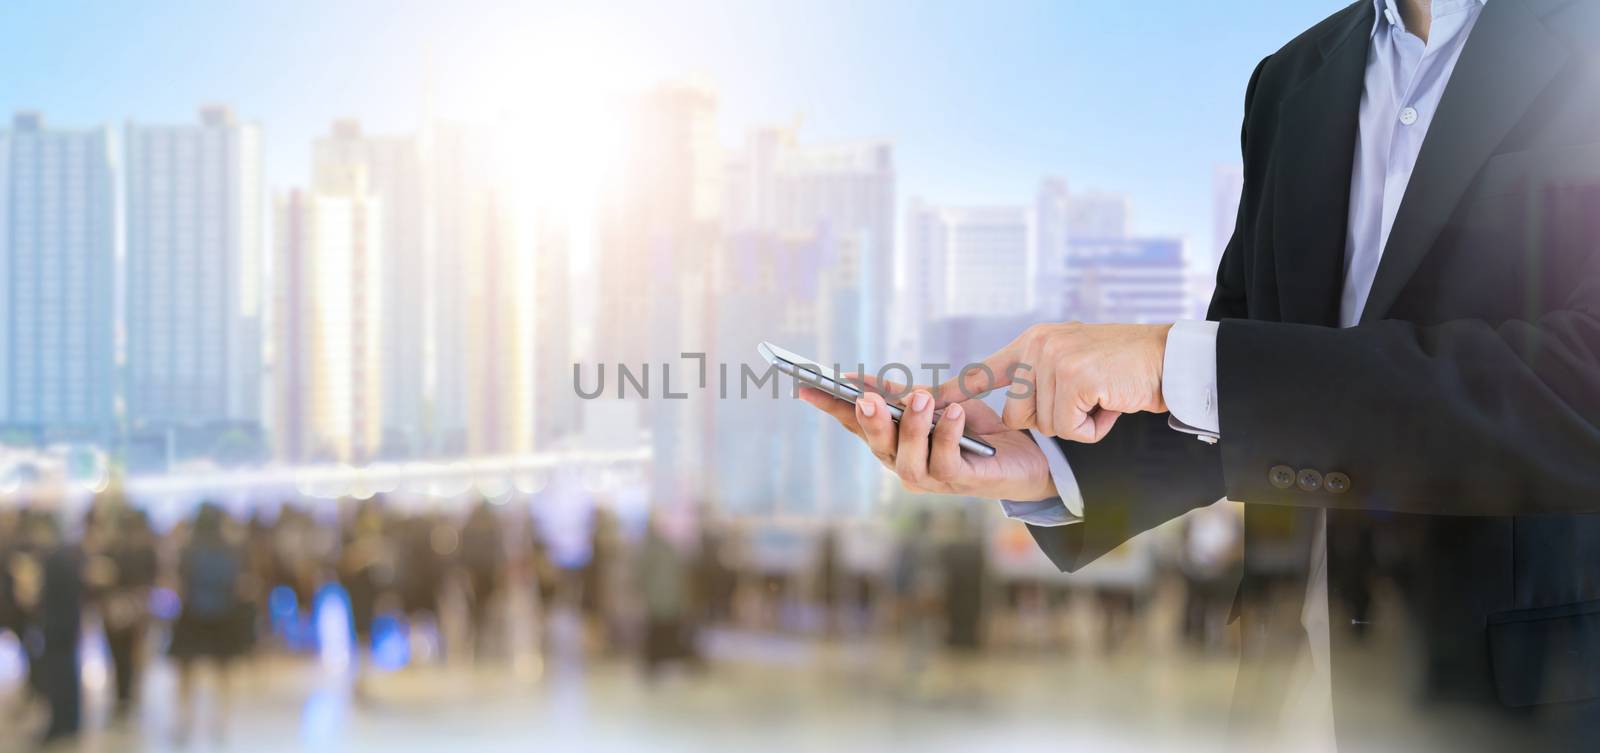 Business people hold smartphones using communication technology by sompongtom